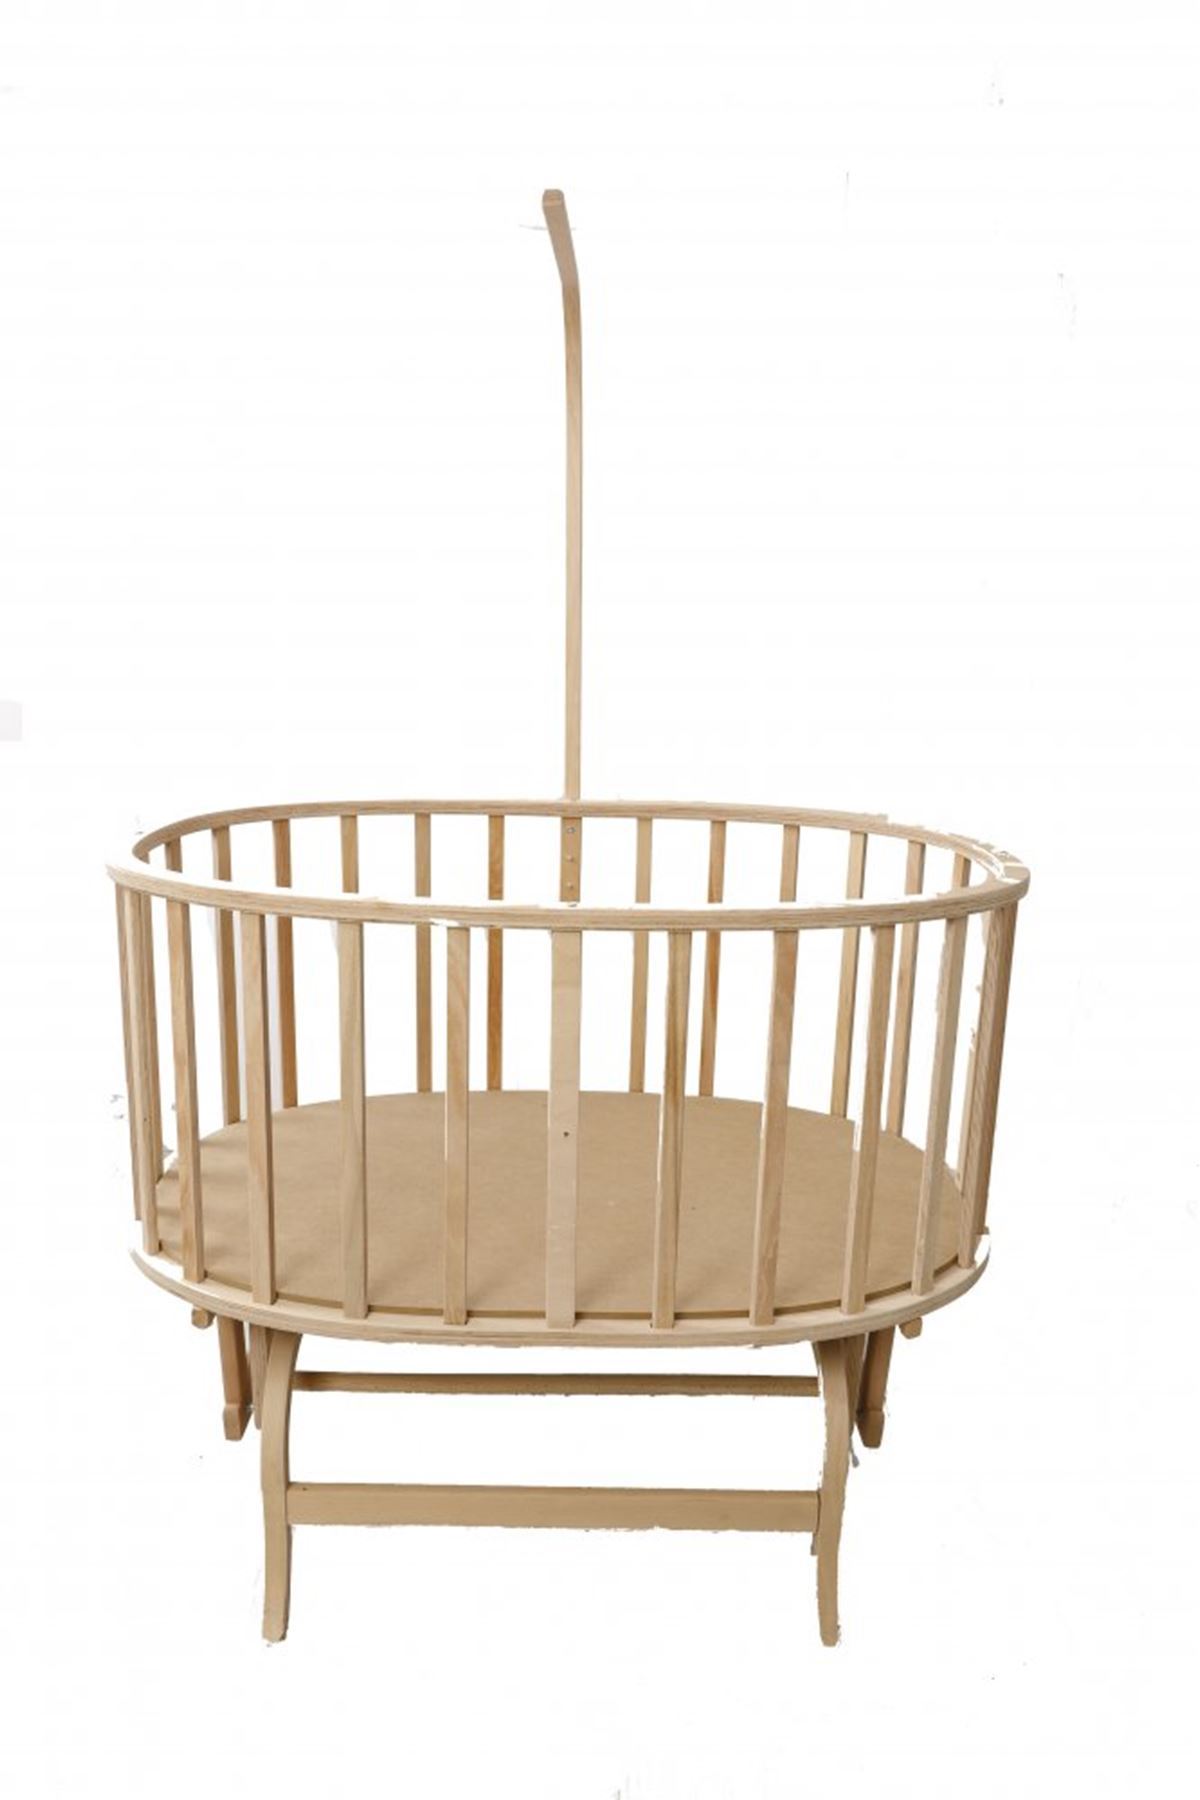 Wooden Baby Cot with Gray Star Sleeping Set